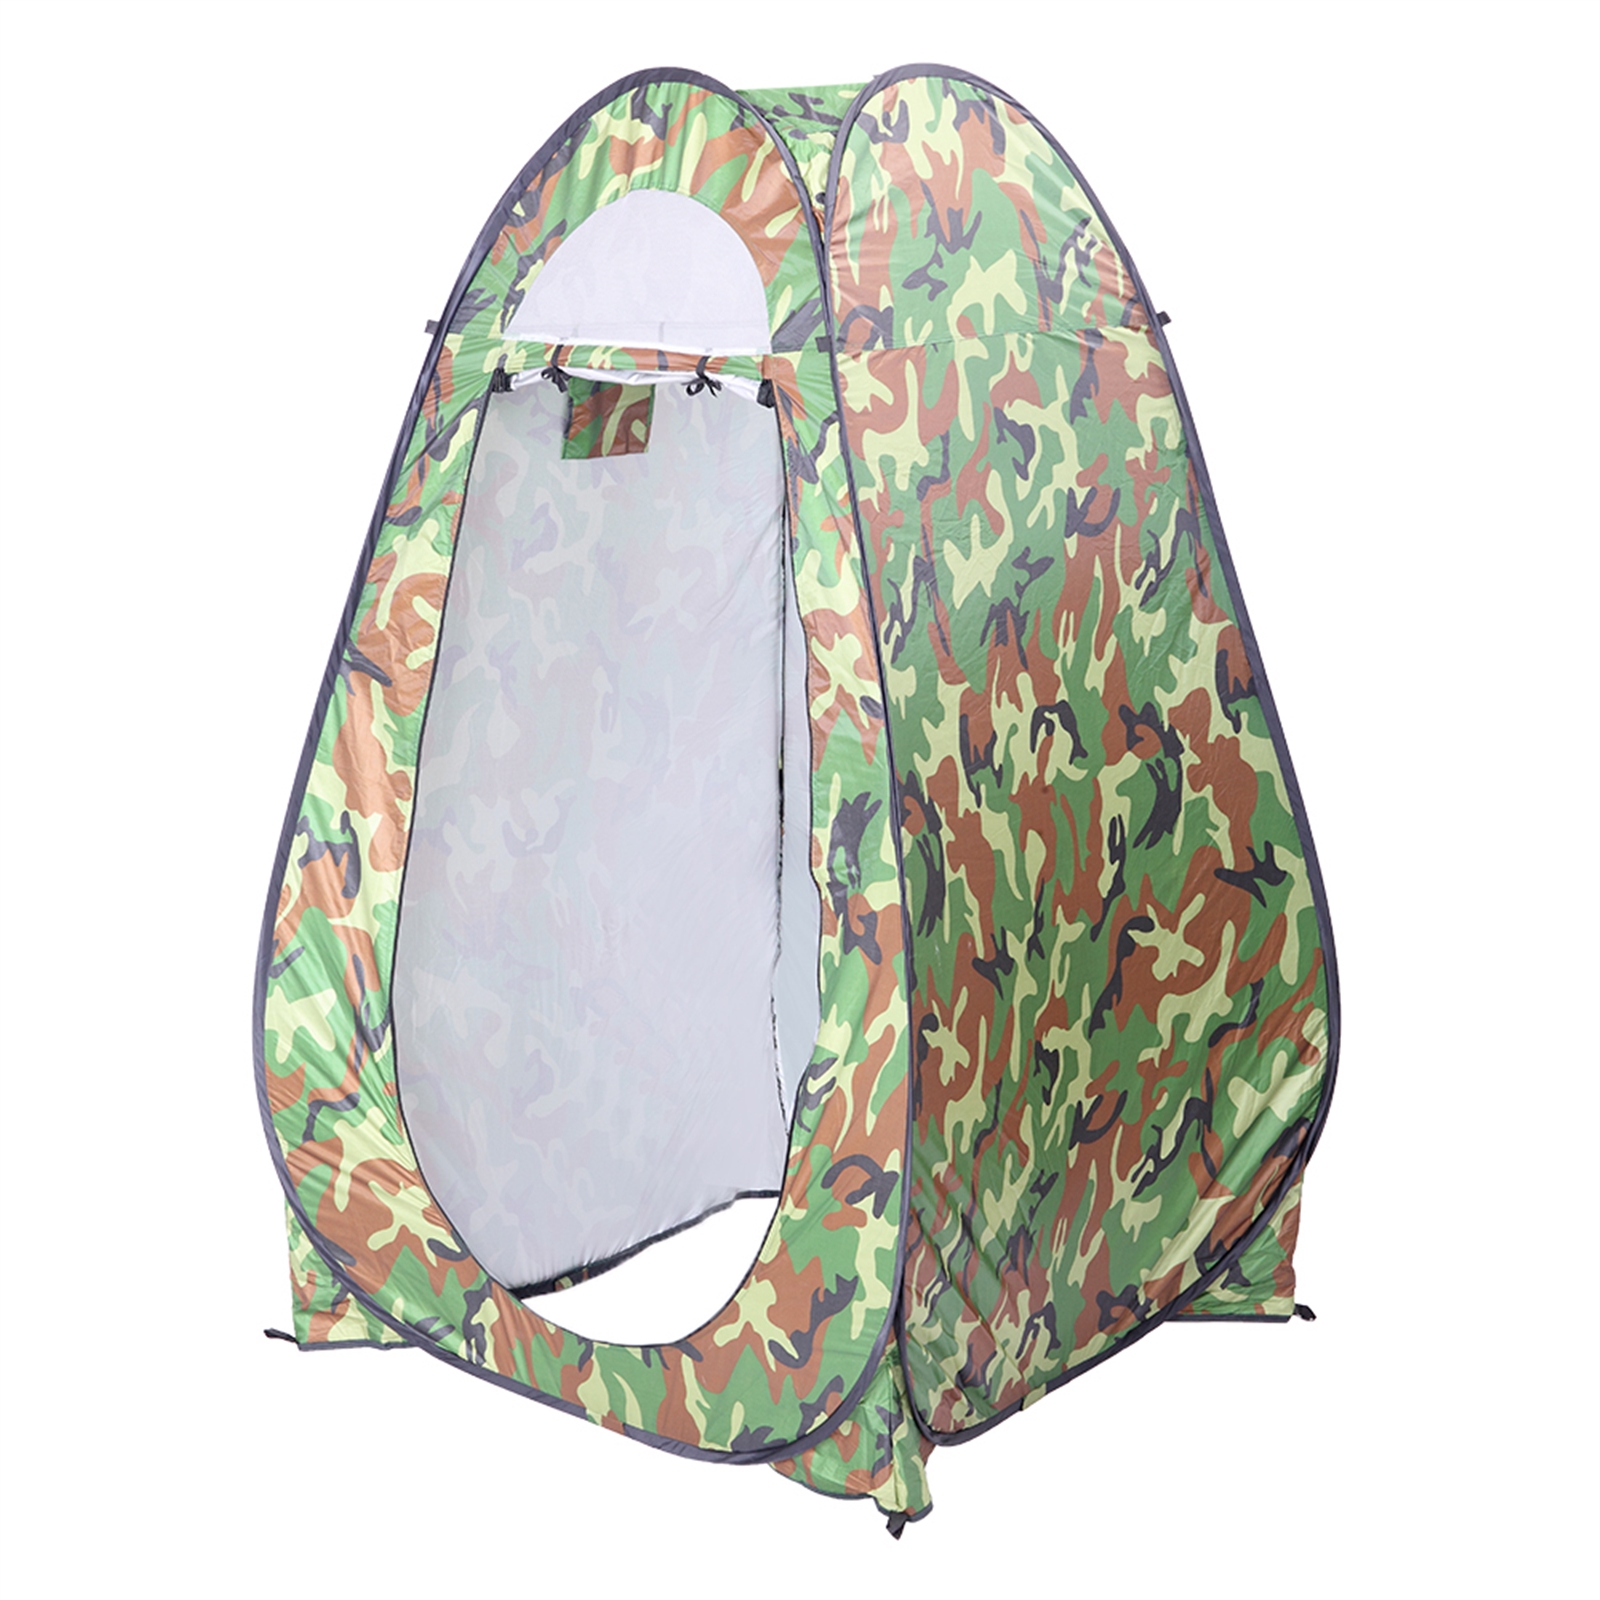 Portable Privacy Tent, Pop-Up Dressing Room Camping Shower Tent for Camping Picnic, Camouflage - image 1 of 7